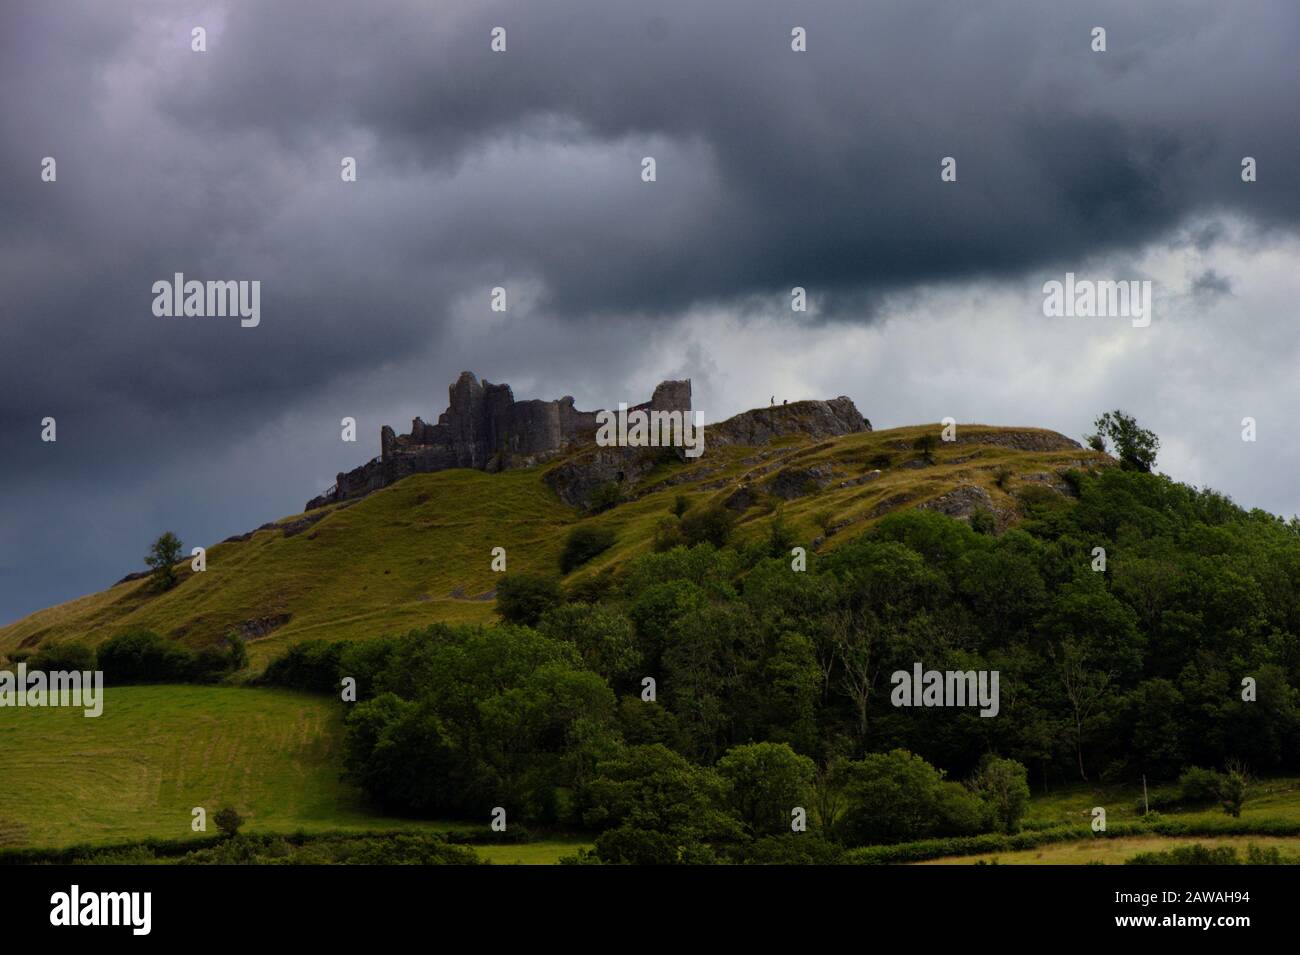 Carreg Cennen close to Llandeilo in Wales, UK. The castle is situated on limestone cliffs. Stock Photo